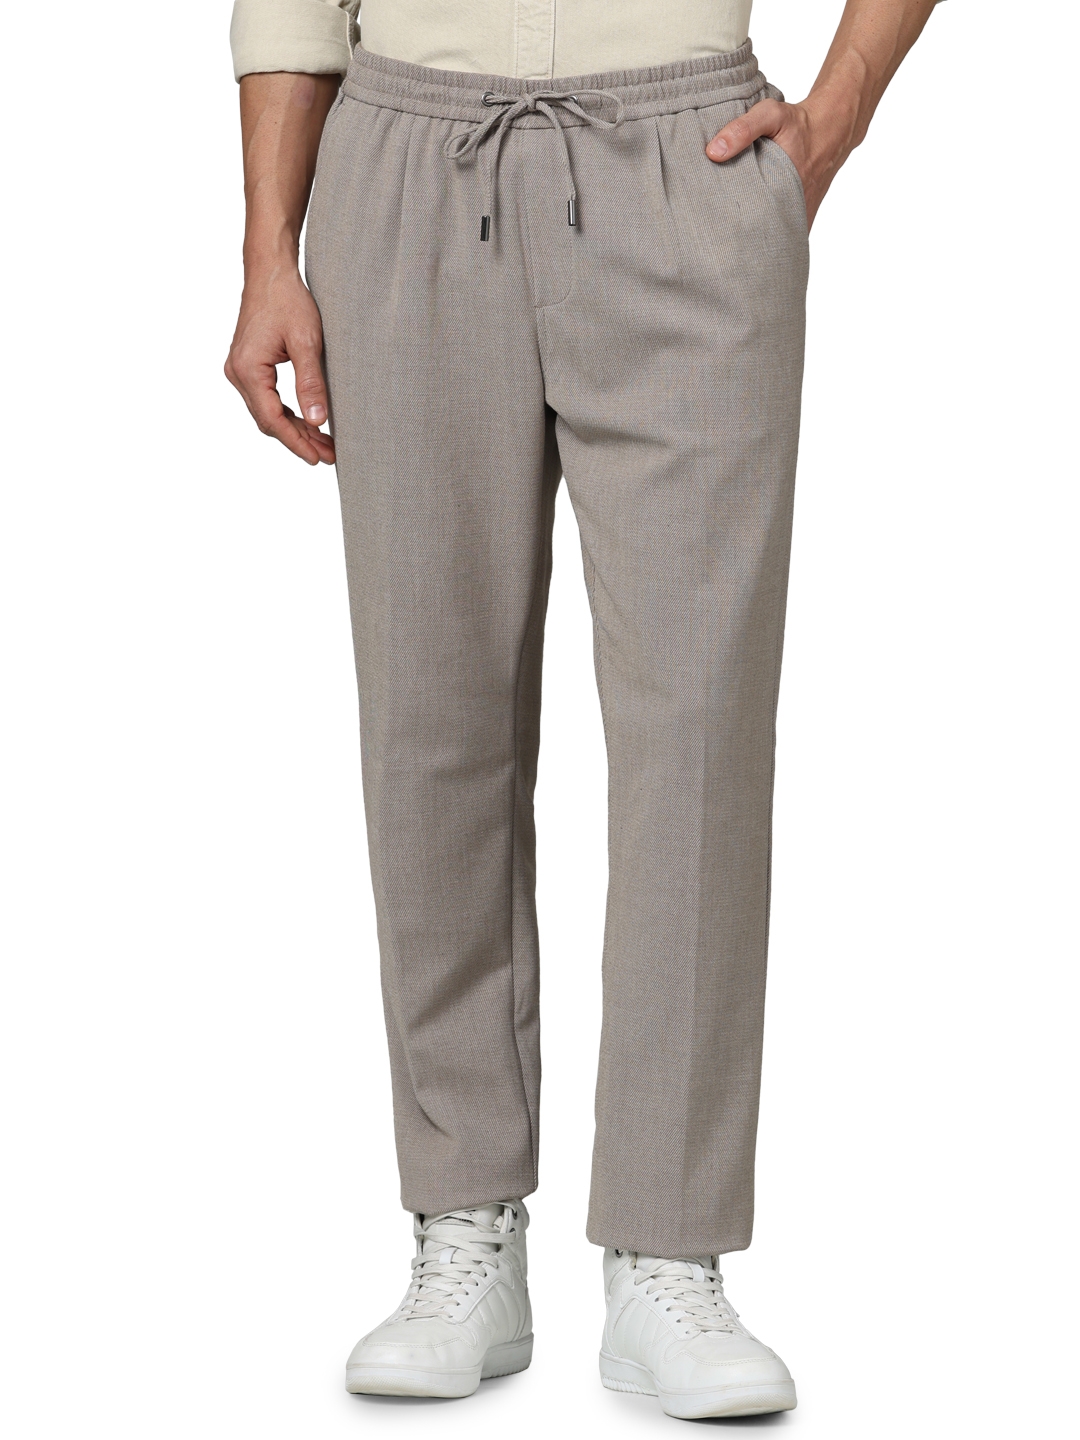 Celio Men Beige Solid Regular Fit Polyester Fashion Casual Trousers